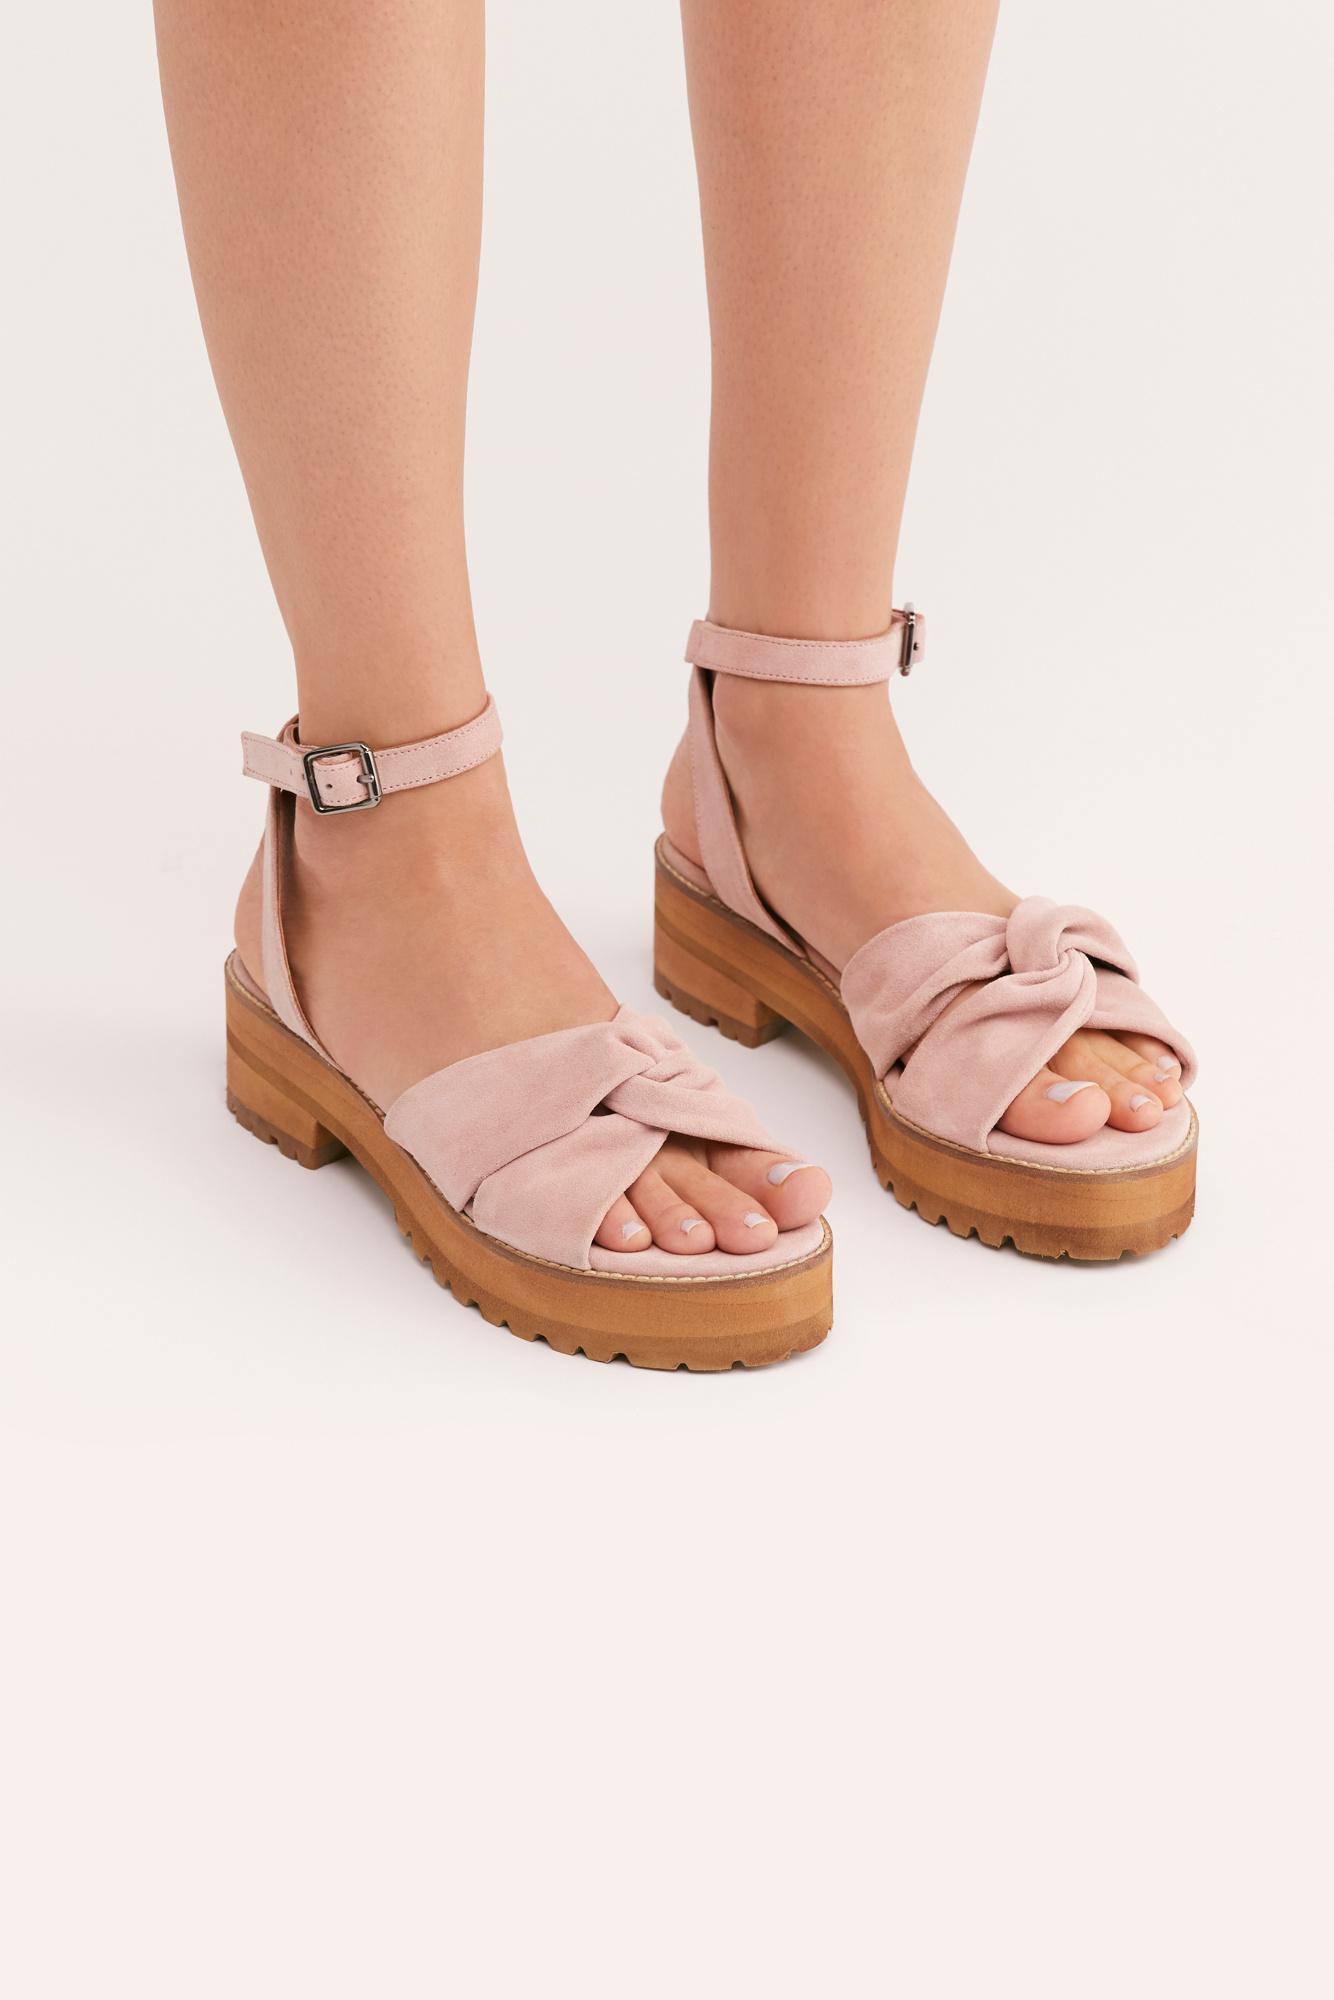 Free People Suede Essex Sandal By Fp Collection in Pink - Lyst